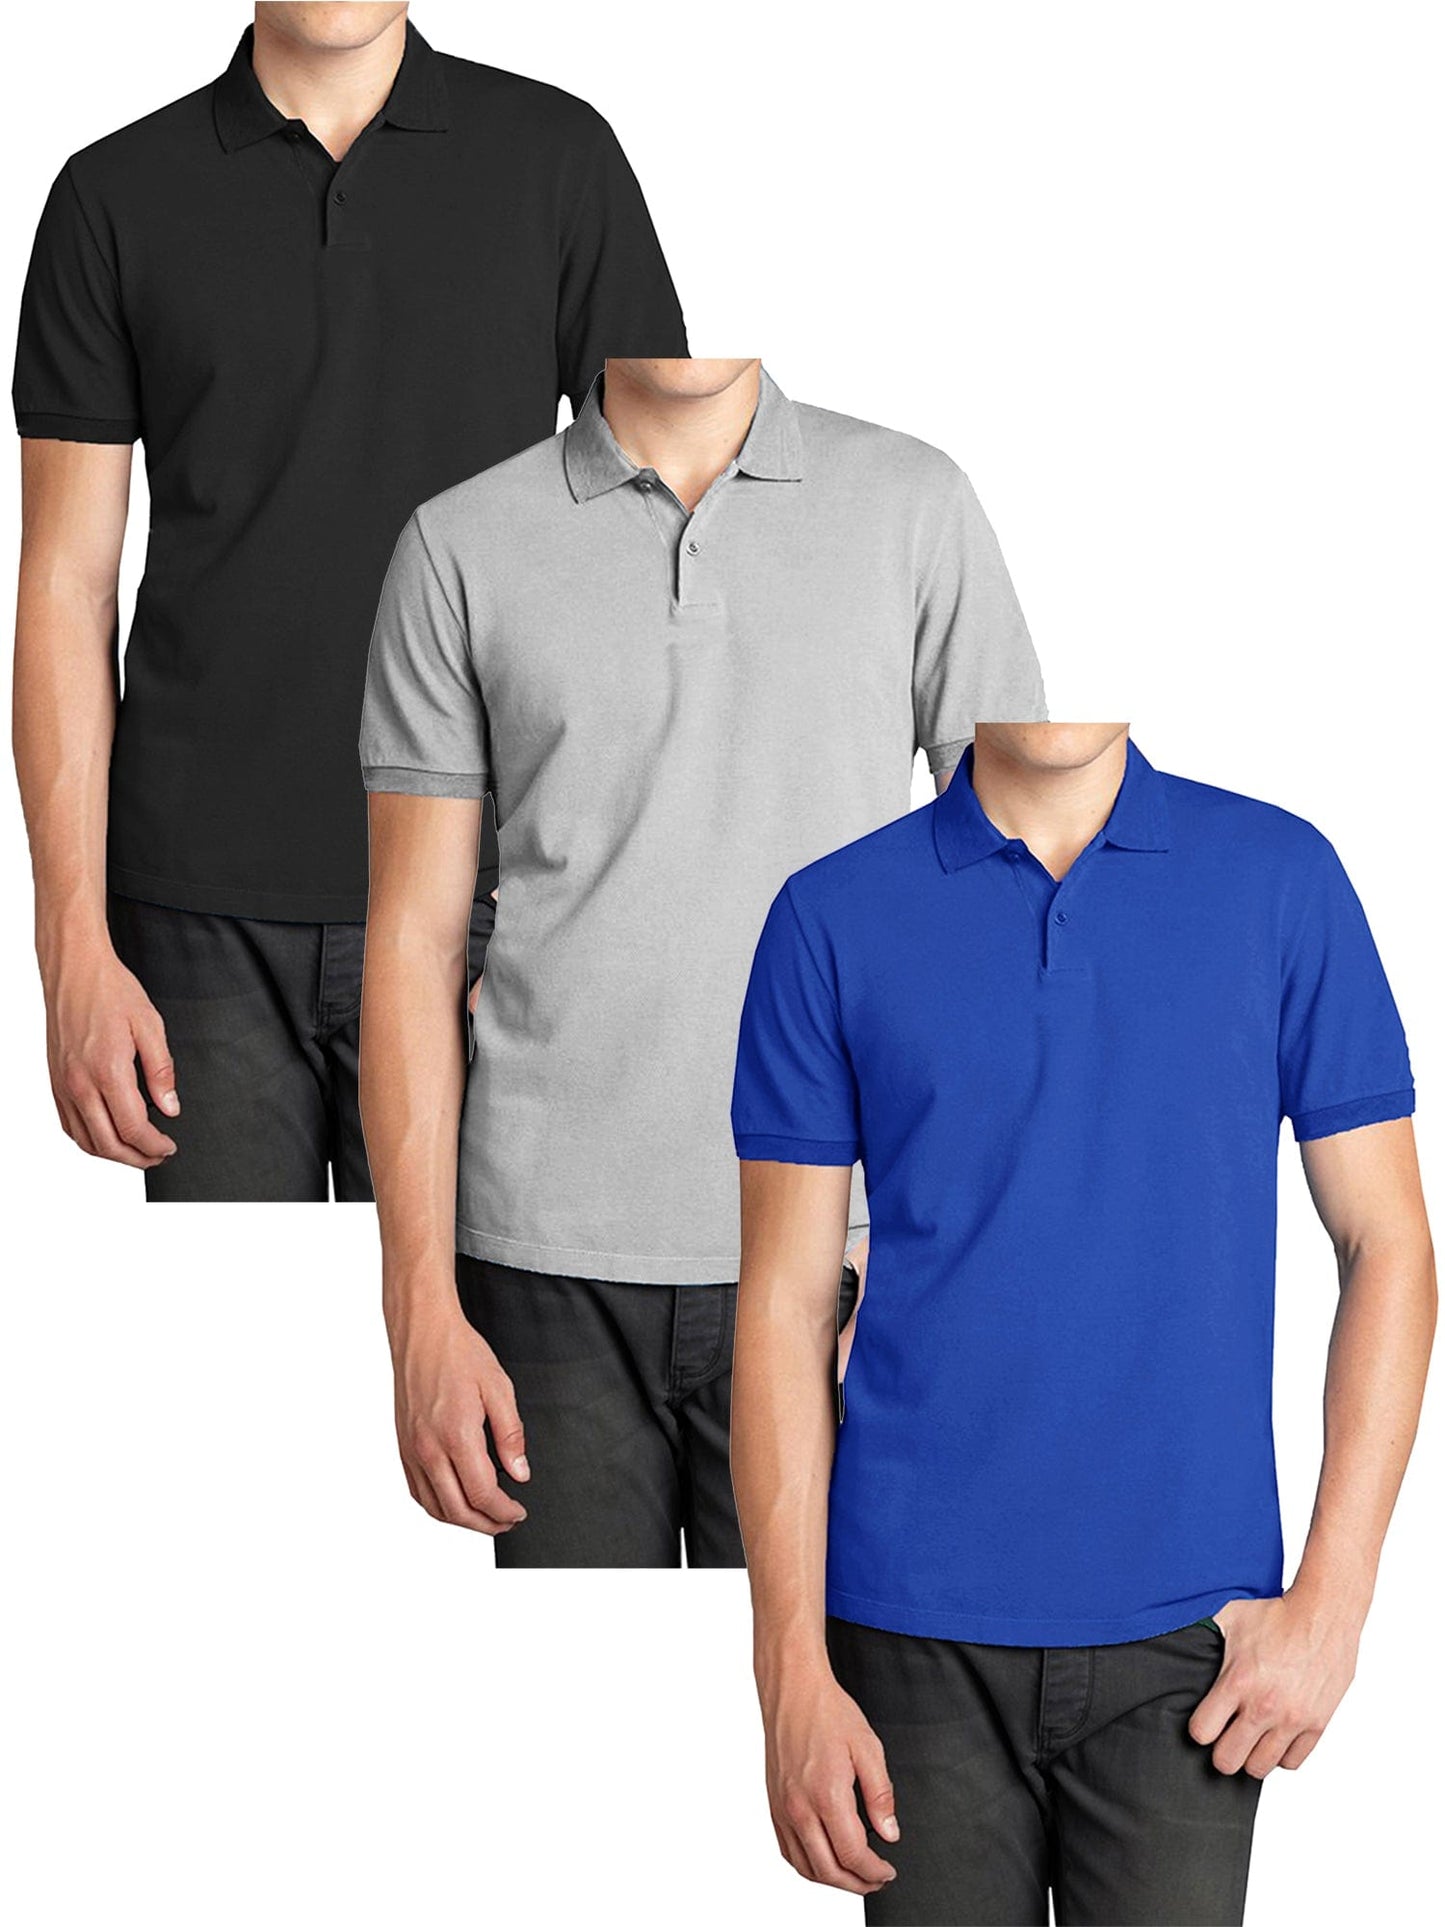 3-Pack Men's Short Sleeve Pique Polo Shirts (S-5XL) - GalaxybyHarvic